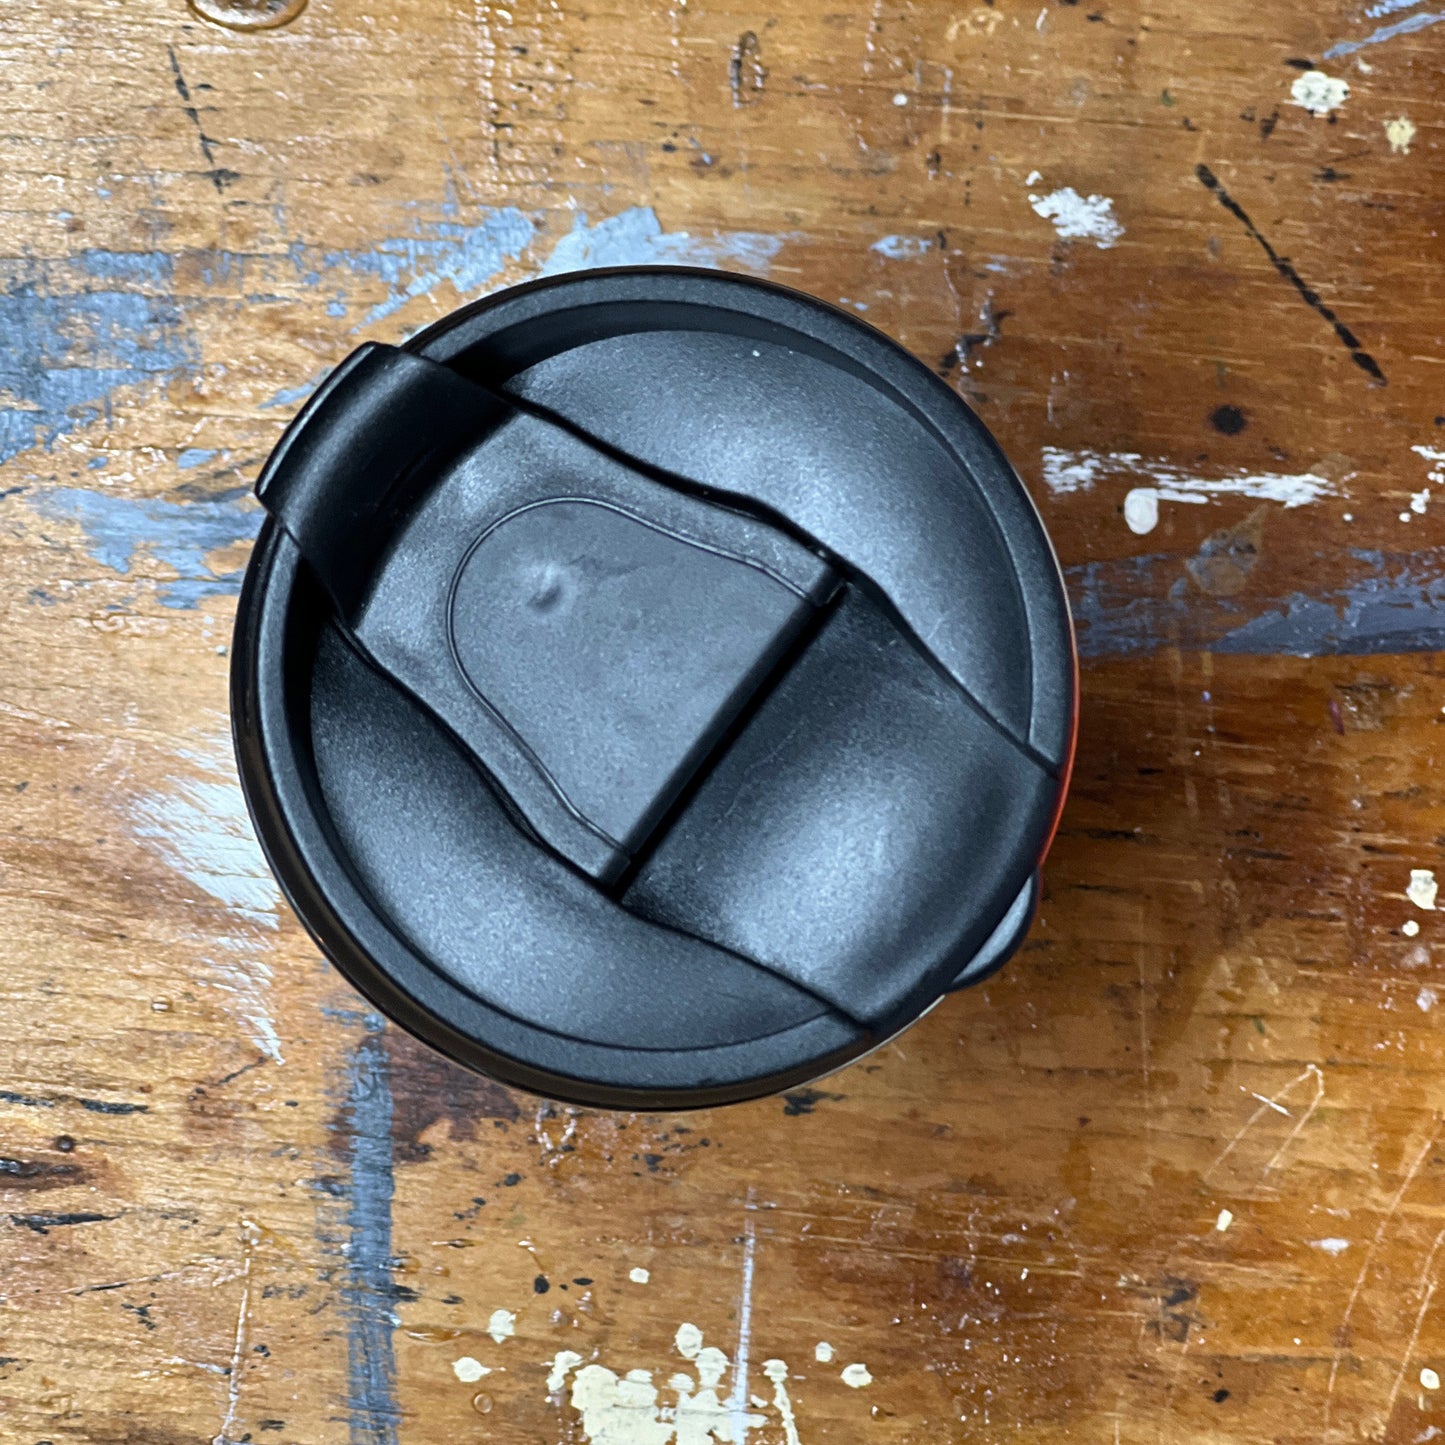 Showing the coffee tumbler's flip-top lid in the closed position.